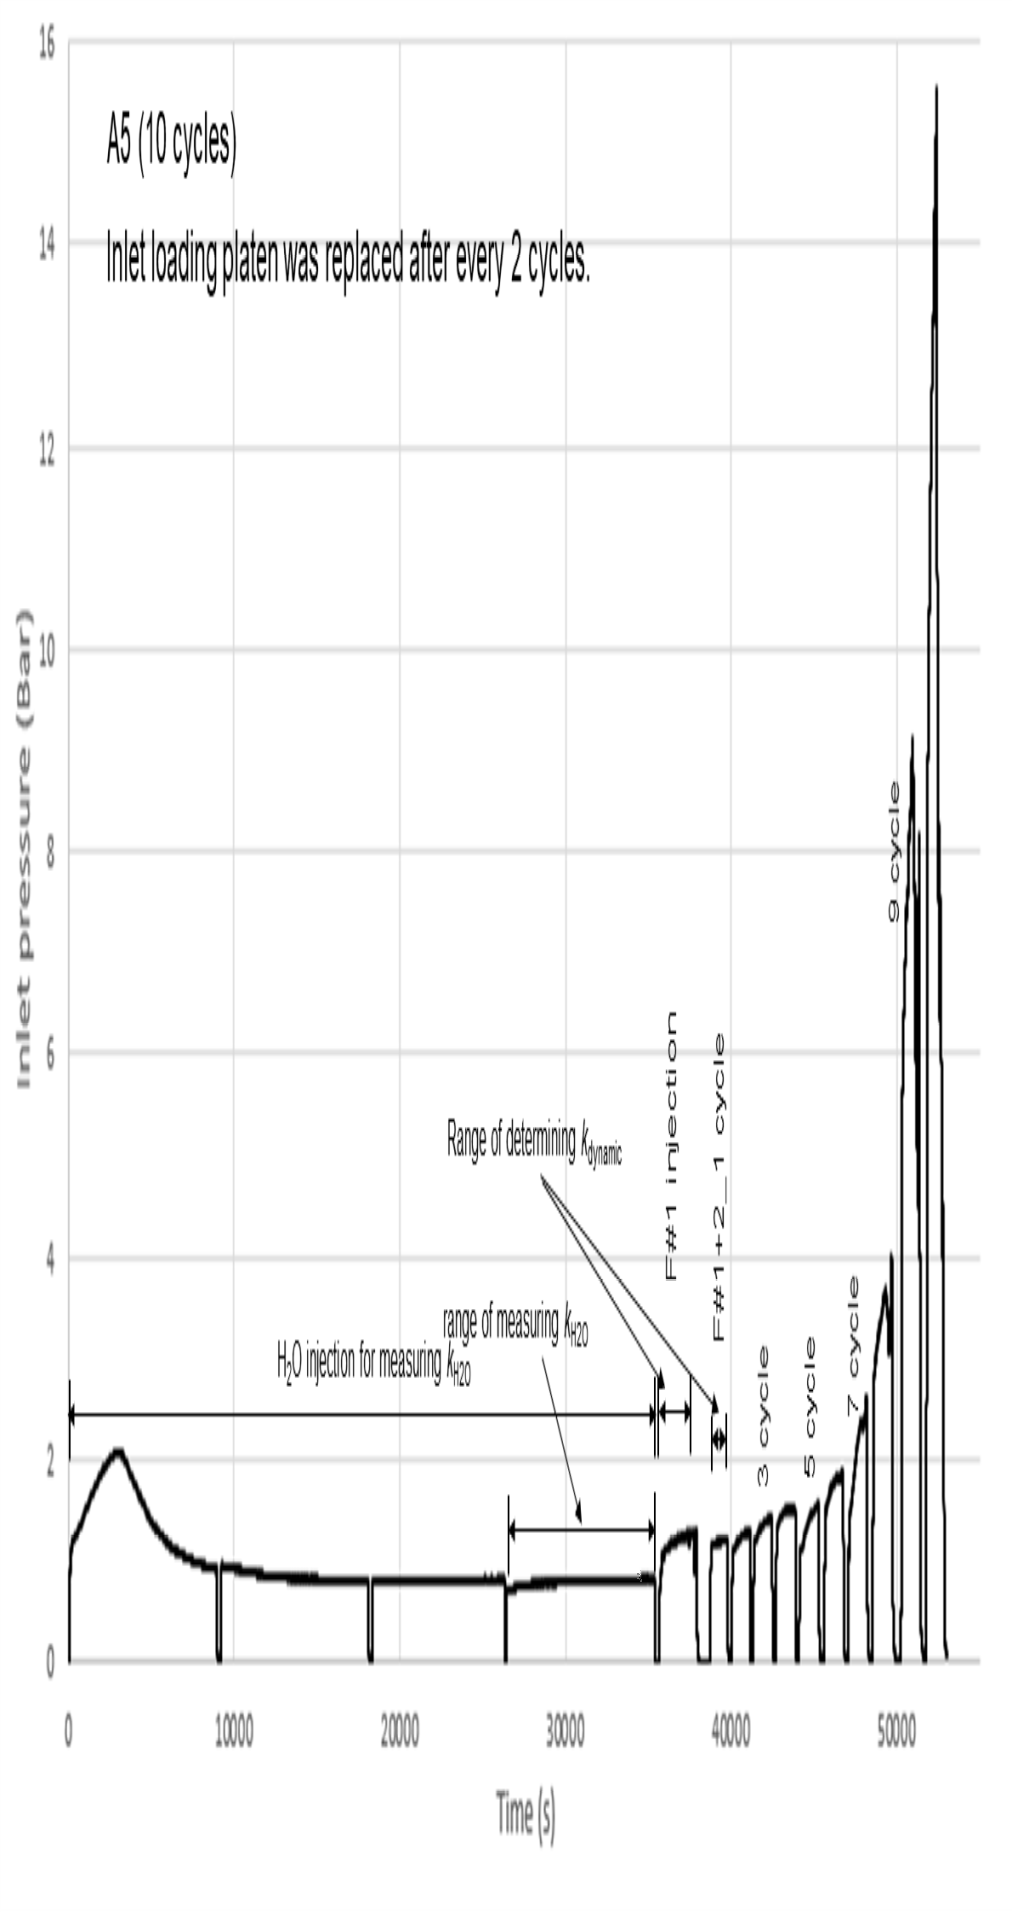 Pressure vs Time measured during the chemical treatment of A5 (10 cycles) sample